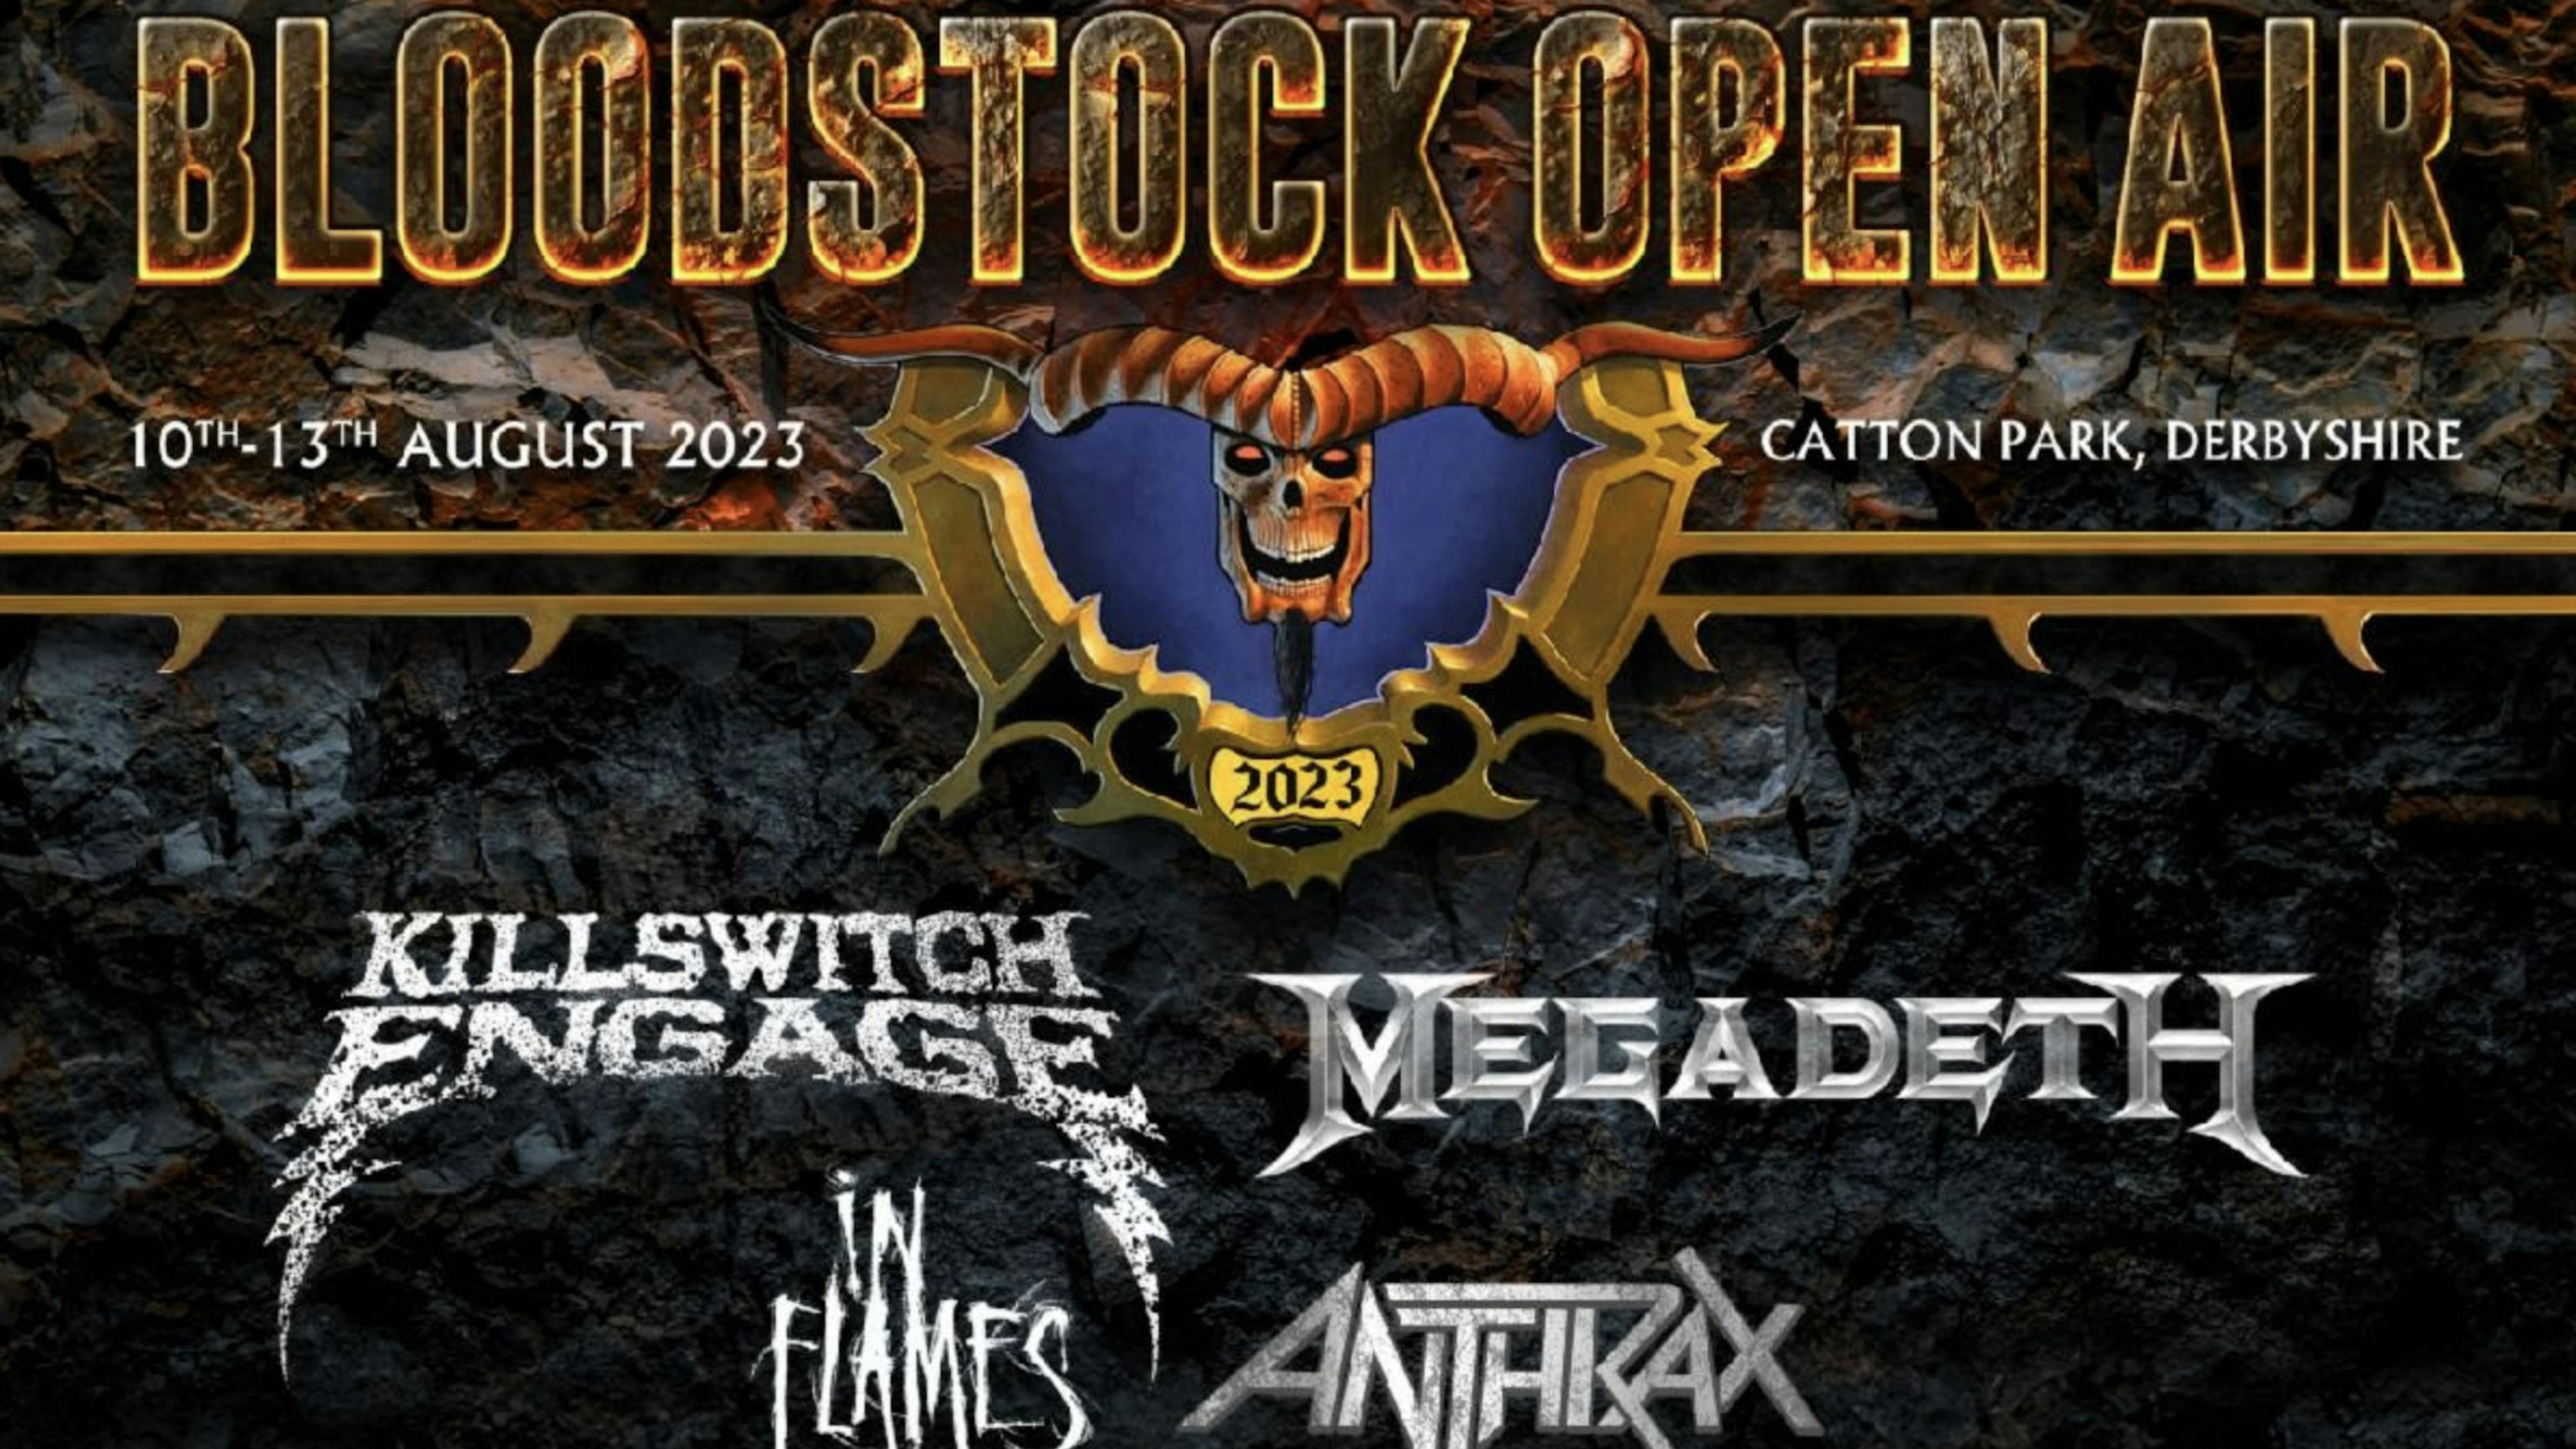 In Flames, Anthrax and more added to Bloodstock 2023